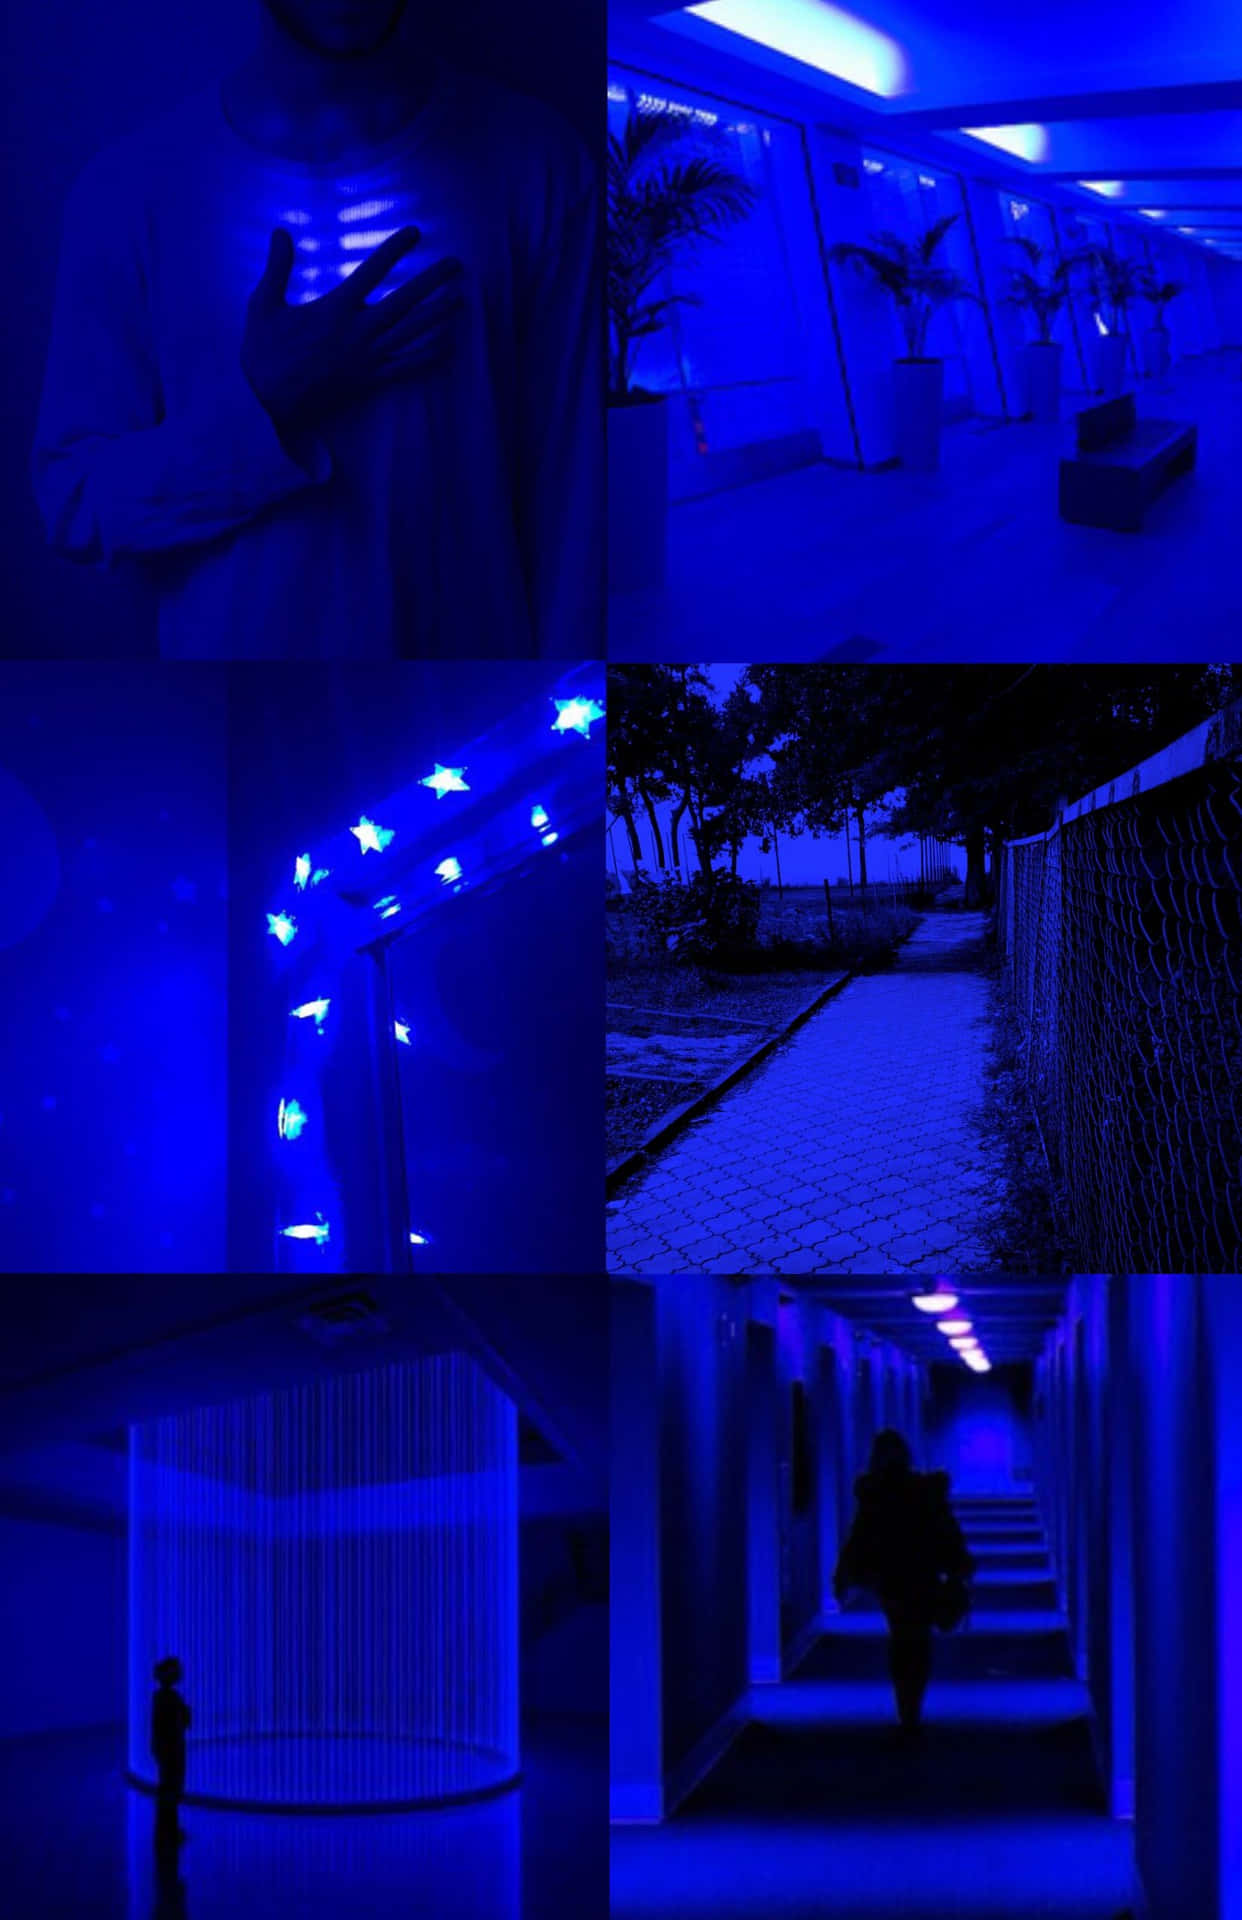 Create your own unique style with dark blue aesthetic.